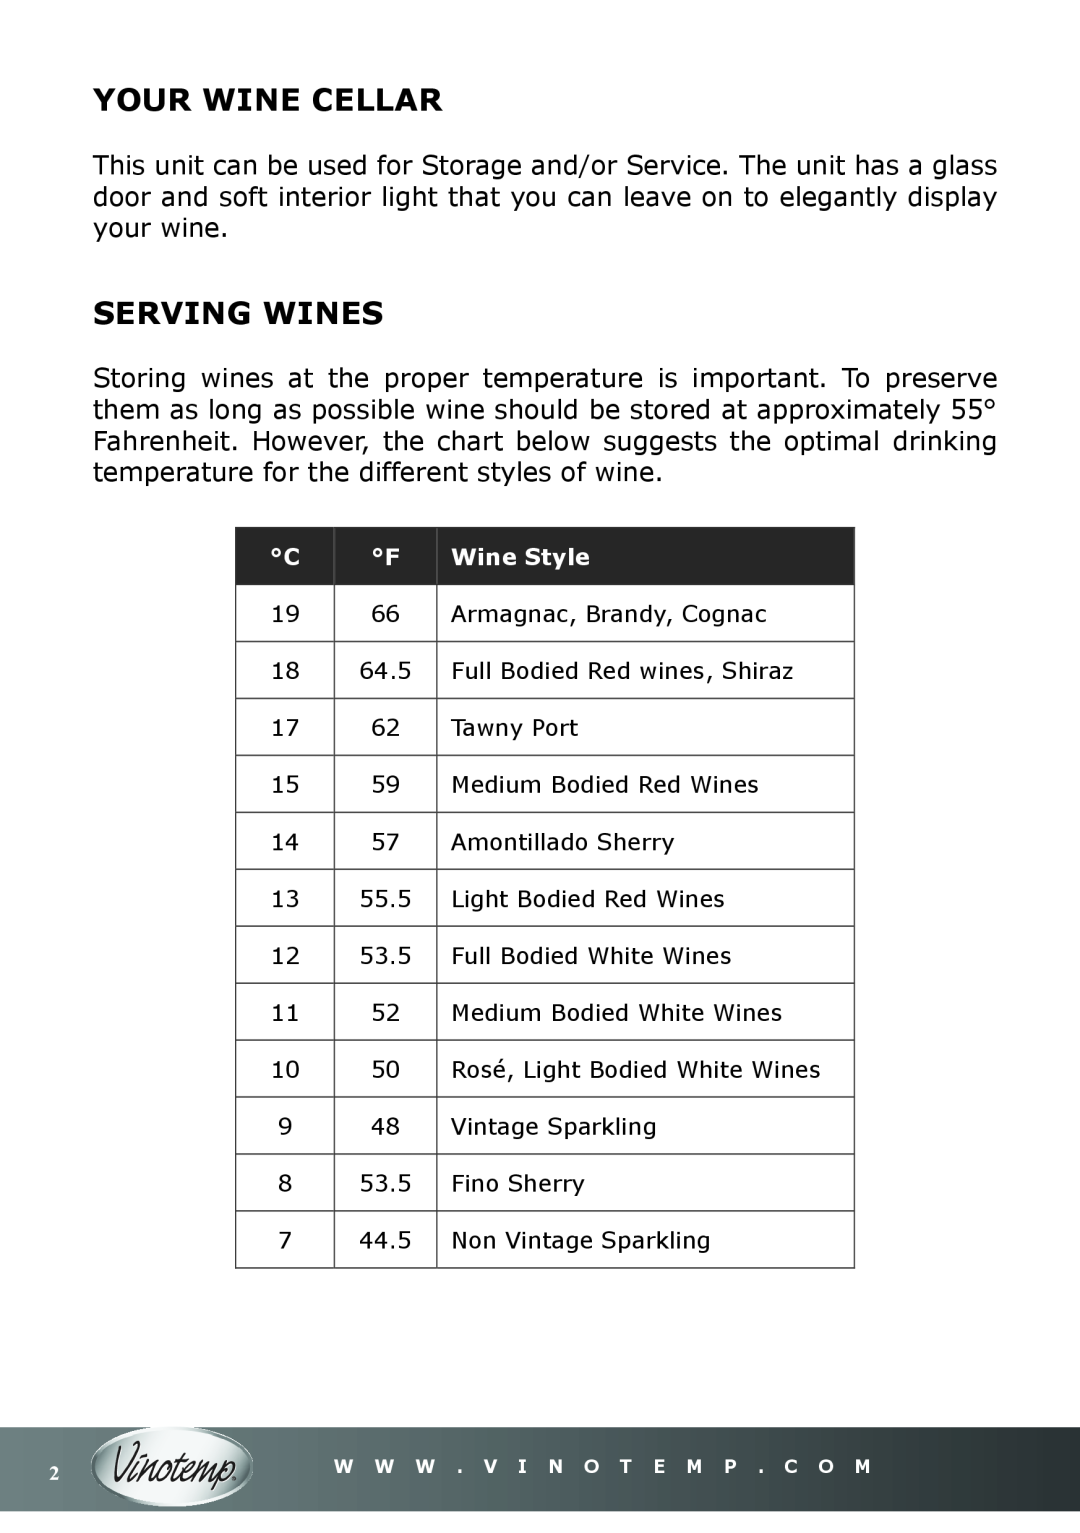 Vinotemp VT-16TEDS owner manual Your Wine Cellar, Serving Wines, Wine Style 